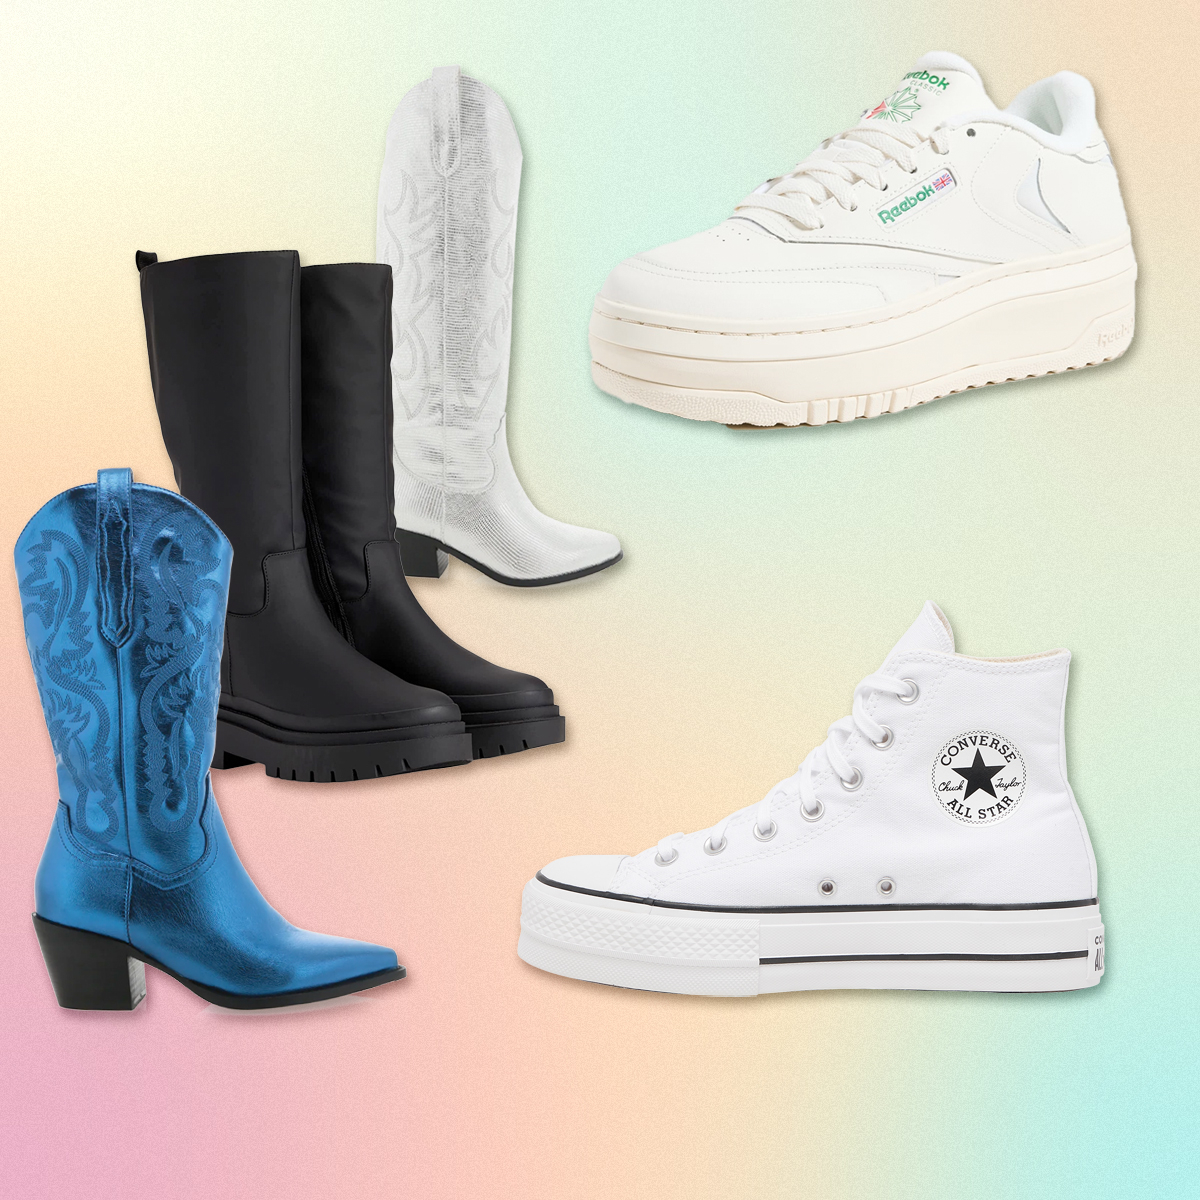 2023 Coachella & Stagecoach Packing Guide: Shop Sneakers, Boots & Sandals That Are Trendy & Comfortable – E! Online